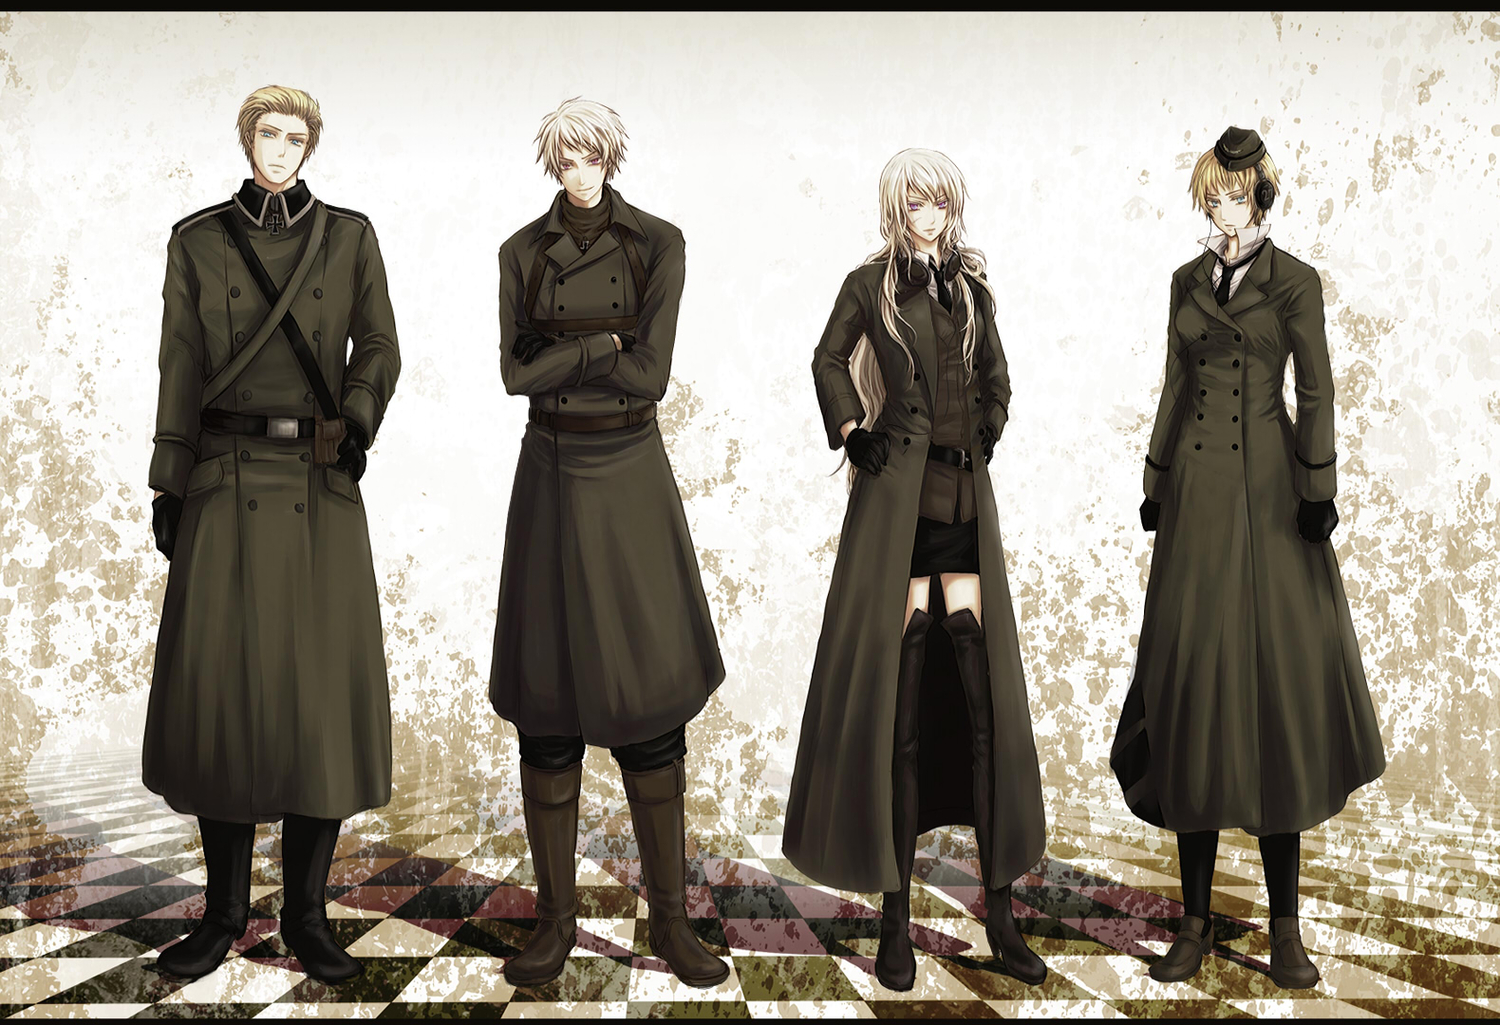 Anime, Prussia, And Germany Image - Axis Powers Hetalia Germany - HD Wallpaper 